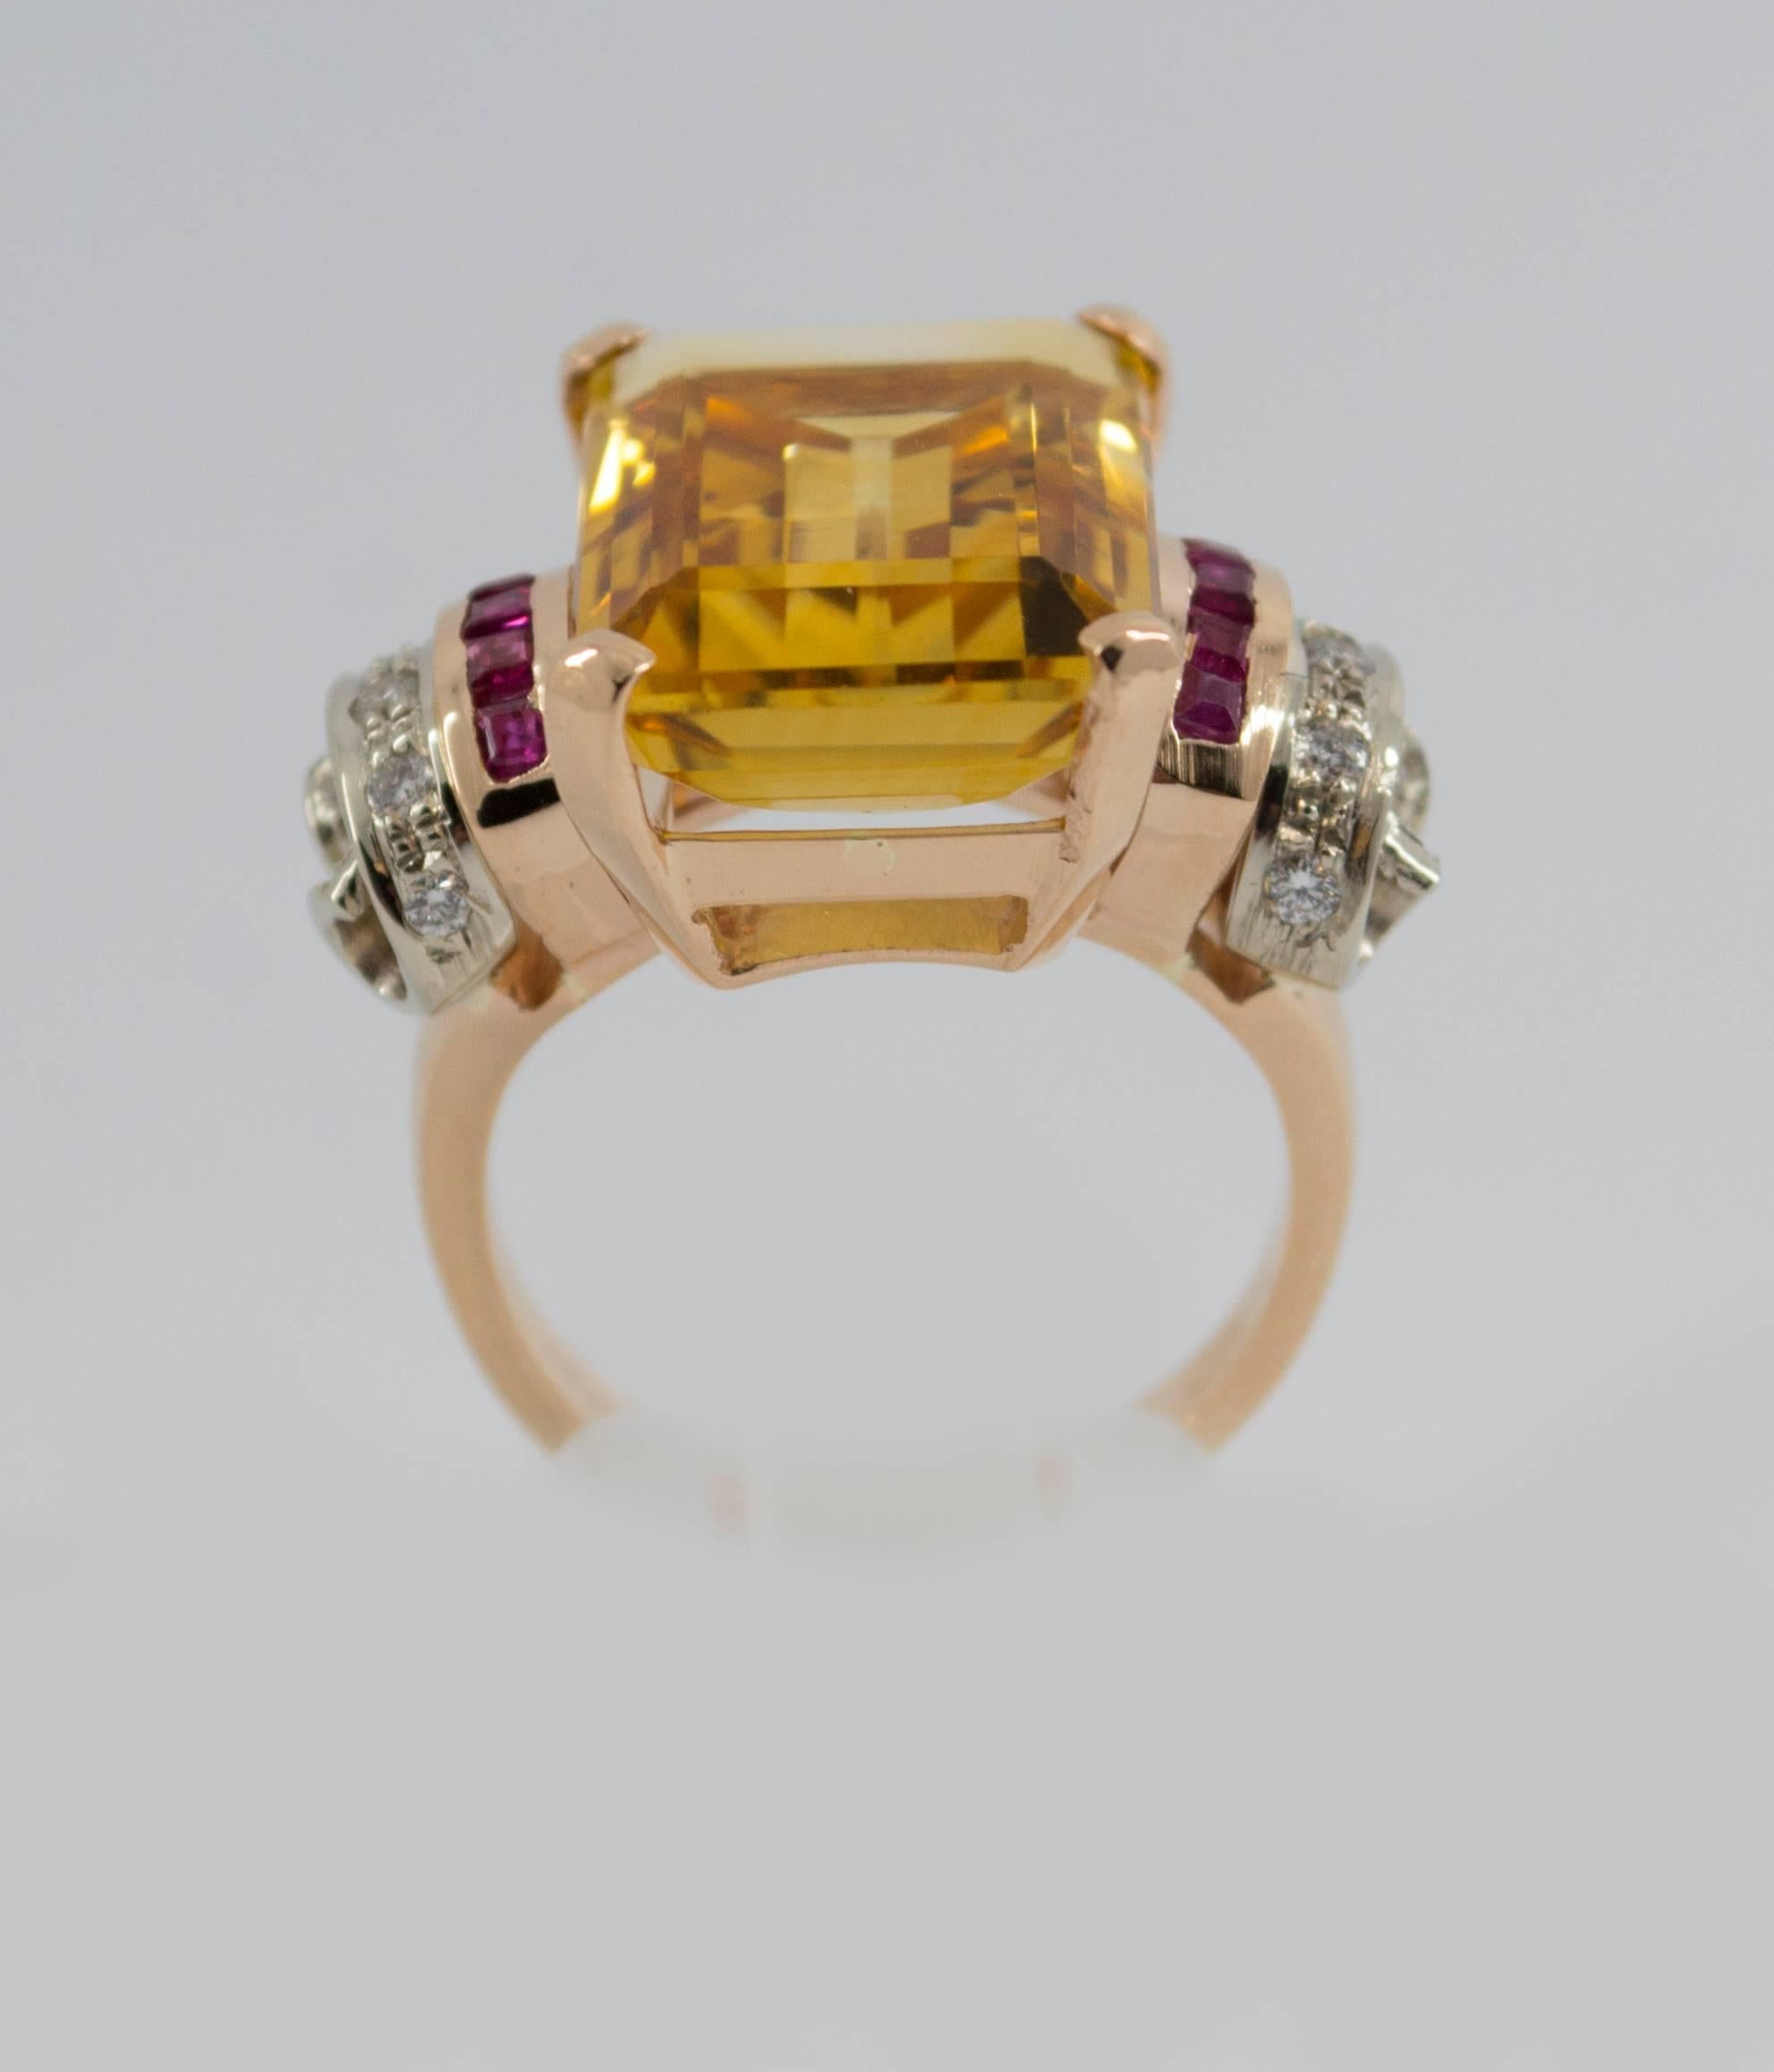 This Ring is made of 14K Yellow Gold.
This Ring has 0.15 Carats of Rubies.
This Ring has 0.30 Carats of Diamonds.
This Ring has a Citrine (16.2mm x 12.1mm x 5.0mm).
Size ITA: 14 USA: 7
We're a workshop so every piece is handmade, customizable and